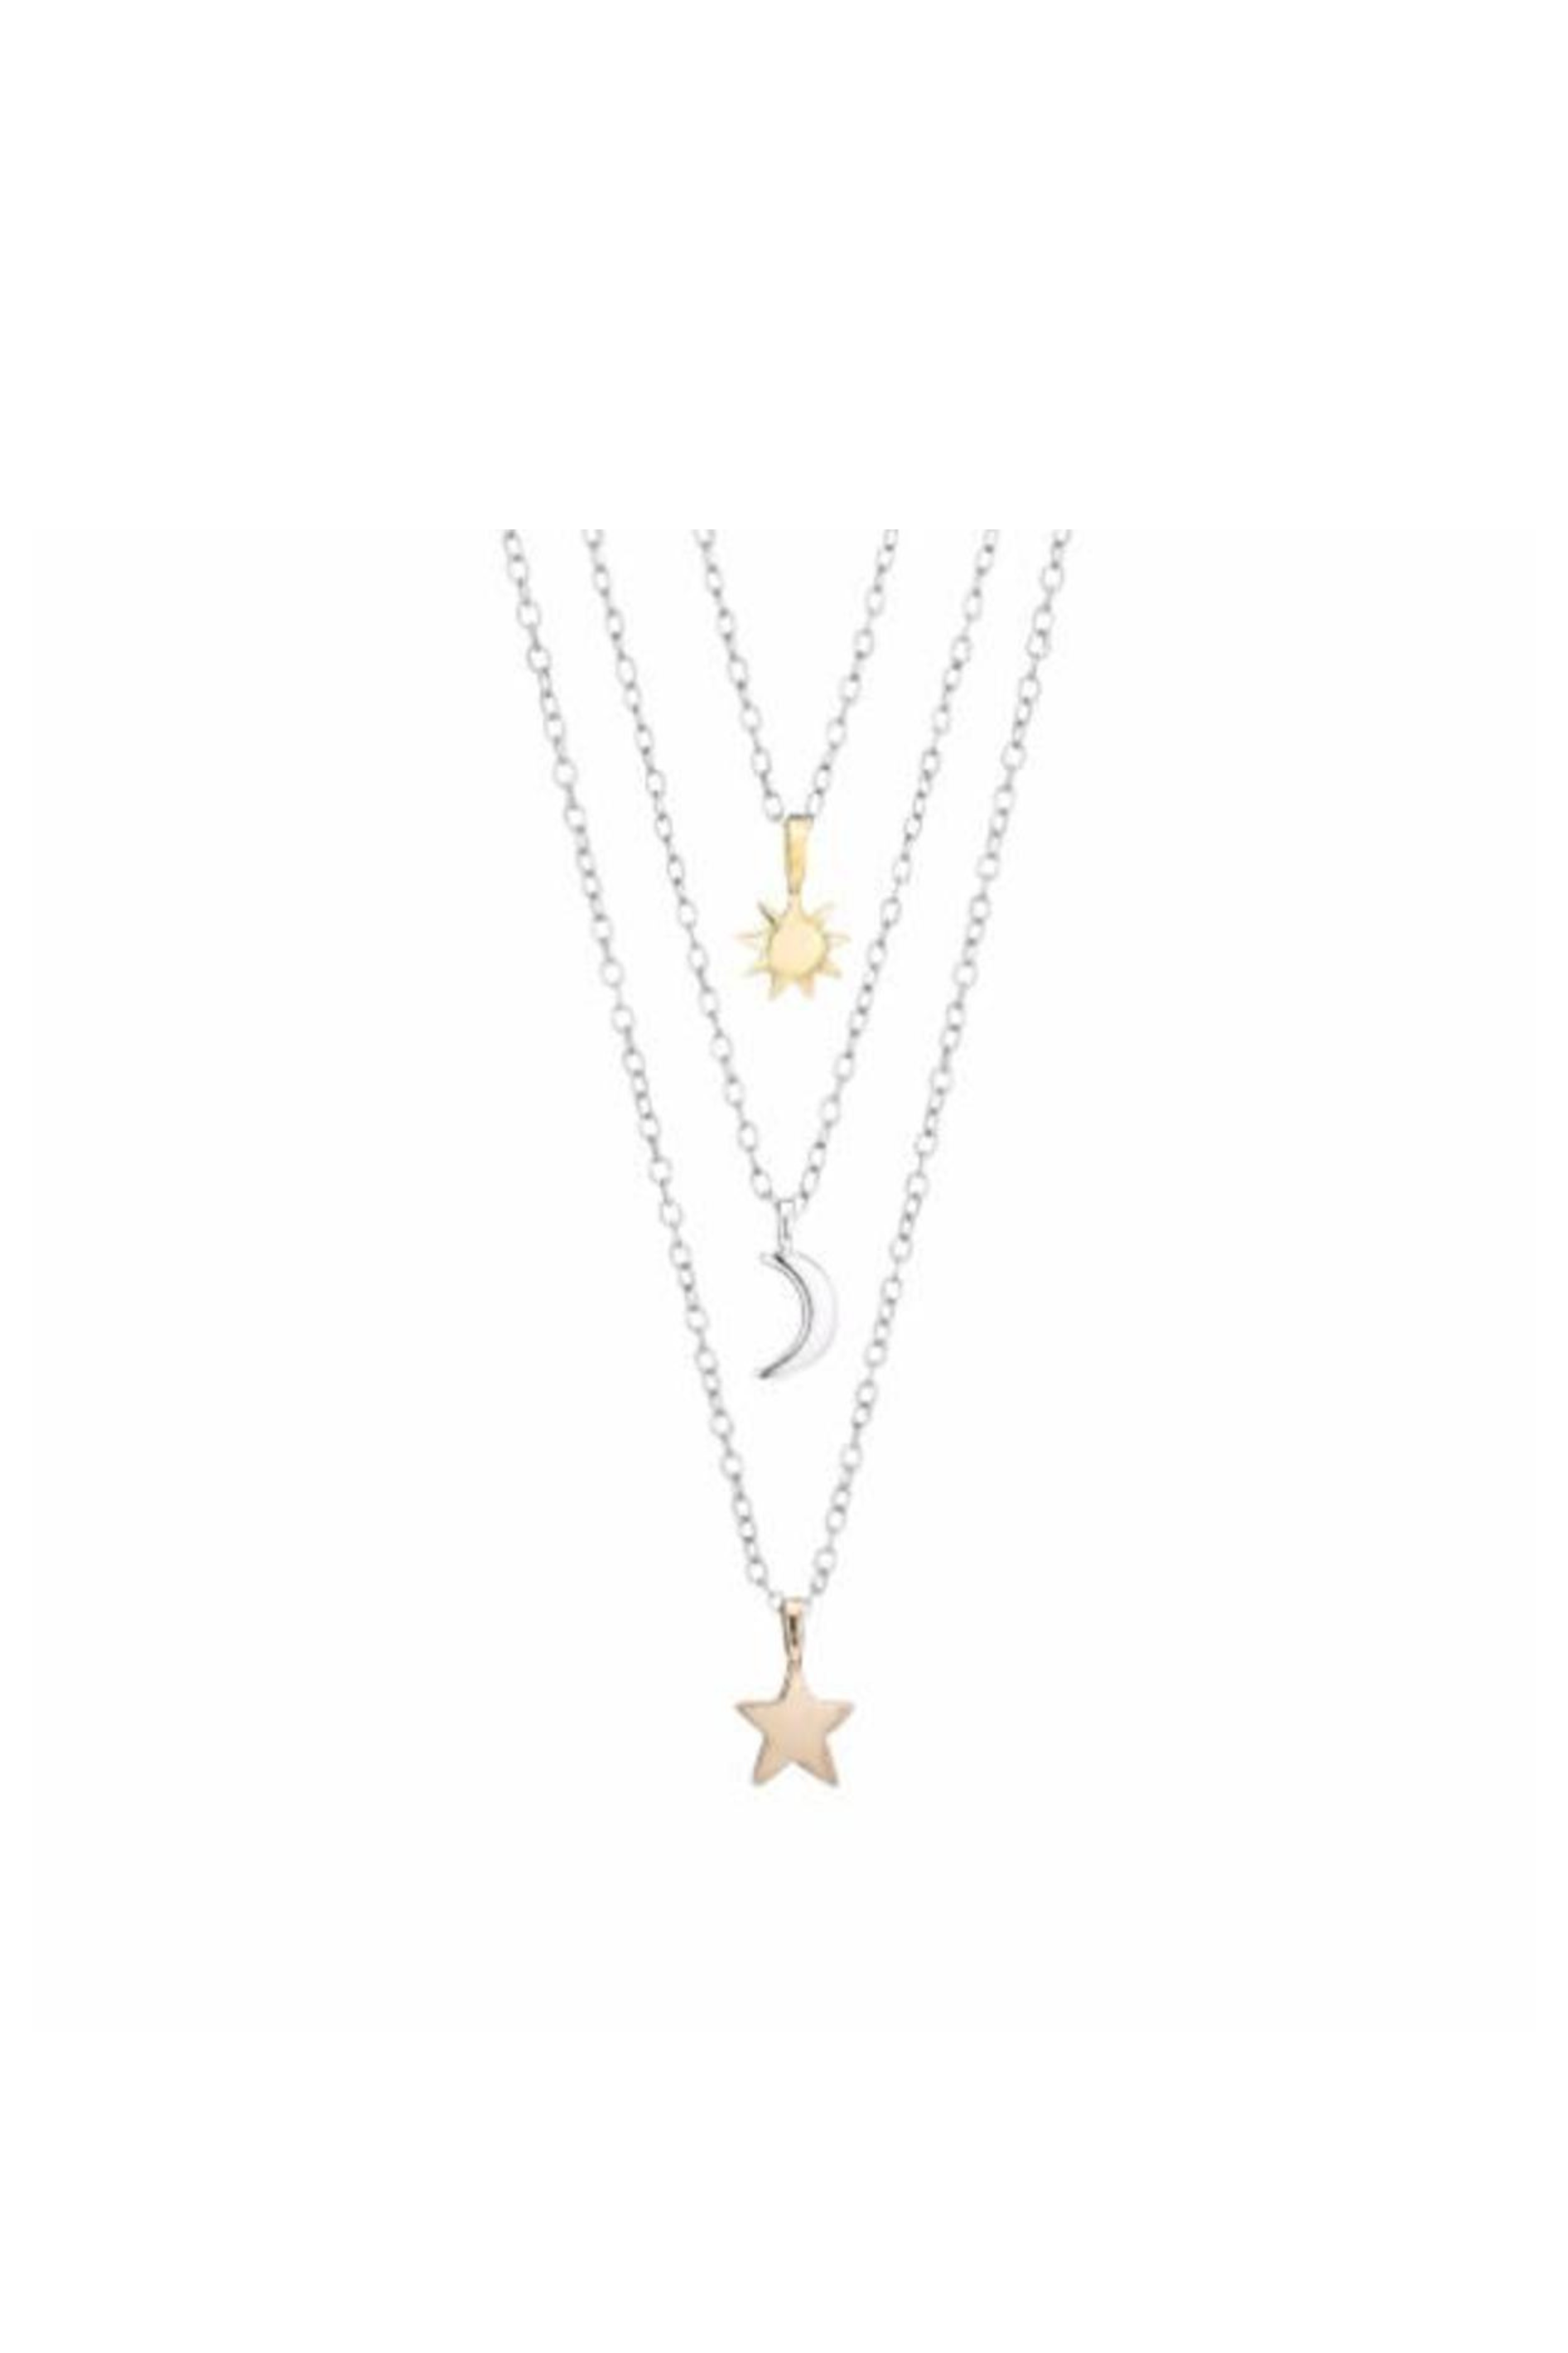 Amazon.com: Sisadodo Friendship Sun Moon Star Necklace for Girls Women  Christmas Gift for Best Friend Matching Bff Necklace for 3 Sister Necklaces  Birthday Gifts for Daughter Friends: Clothing, Shoes & Jewelry